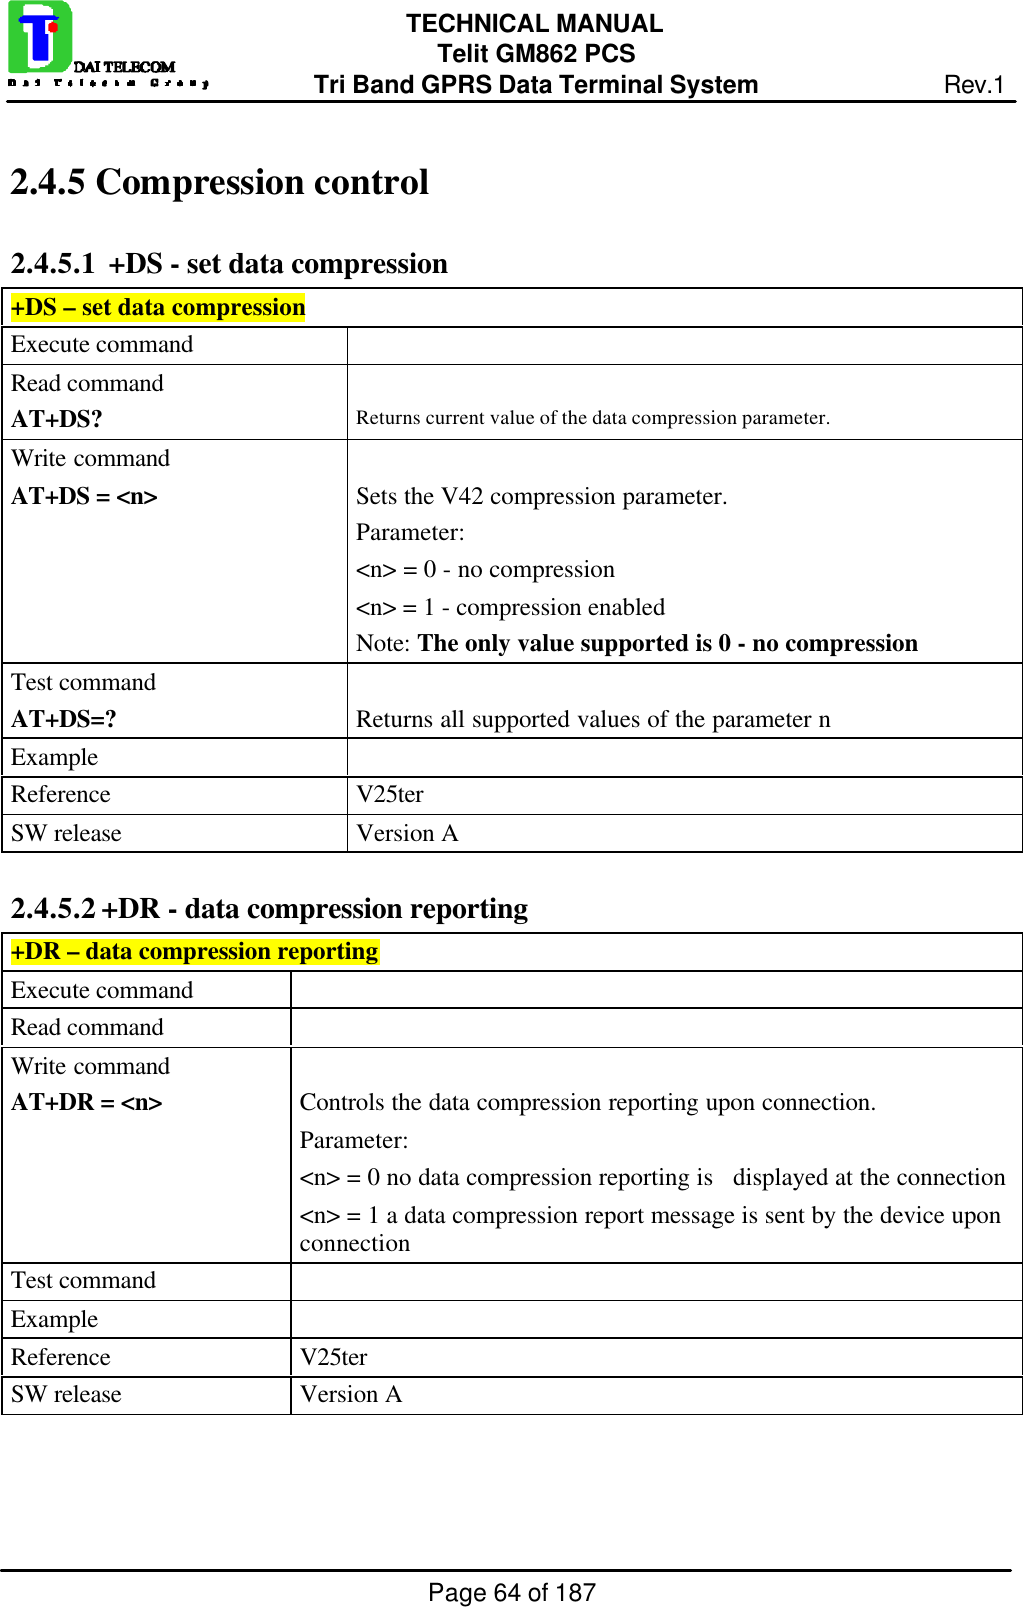 Page 64 of 187TECHNICAL MANUALTelit GM862 PCSTri Band GPRS Data Terminal System Rev.12.4.5  Compression control2.4.5.1  +DS - set data compression+DS – set data compressionExecute commandRead commandAT+DS? Returns current value of the data compression parameter.Write commandAT+DS = &lt;n&gt; Sets the V42 compression parameter.Parameter:&lt;n&gt; = 0 - no compression  &lt;n&gt; = 1 - compression enabledNote: The only value supported is 0 - no compressionTest commandAT+DS=? Returns all supported values of the parameter nExampleReference V25terSW release Version A2.4.5.2 +DR - data compression reporting+DR – data compression reportingExecute commandRead commandWrite commandAT+DR = &lt;n&gt; Controls the data compression reporting upon connection.Parameter:&lt;n&gt; = 0 no data compression reporting is   displayed at the connection&lt;n&gt; = 1 a data compression report message is sent by the device uponconnectionTest commandExampleReference V25terSW release Version A